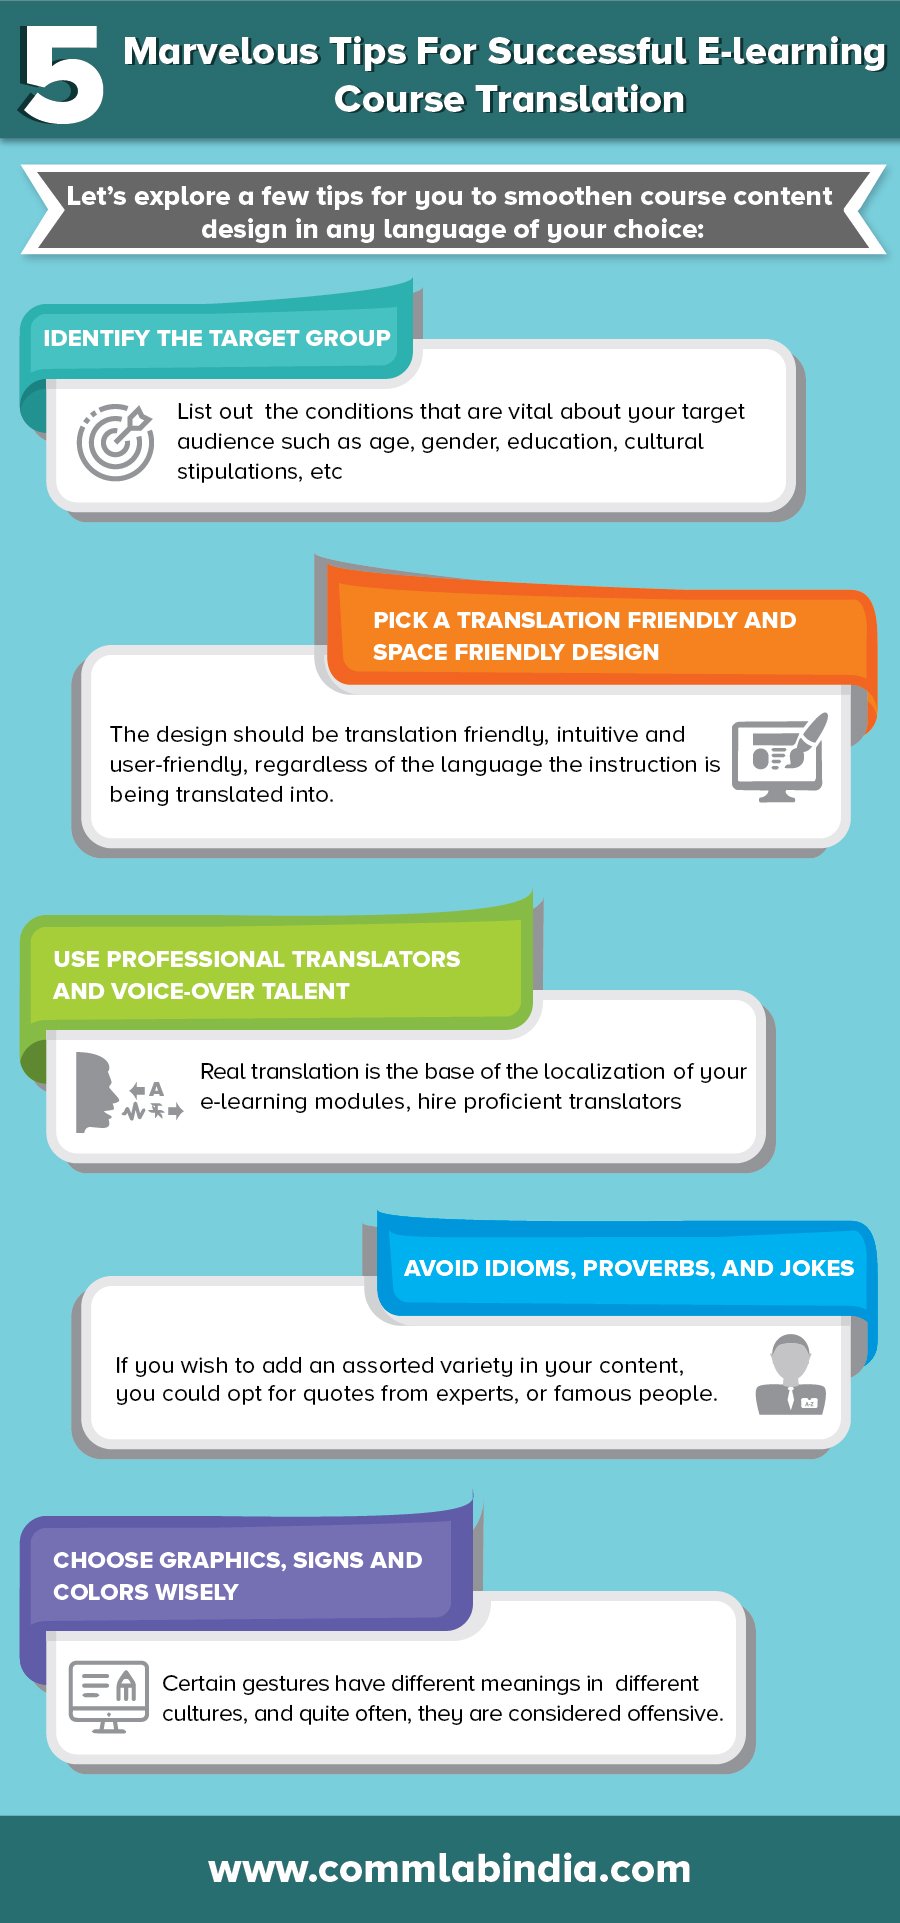 5 Marvelous Tips For Successful E-learning Course Translation